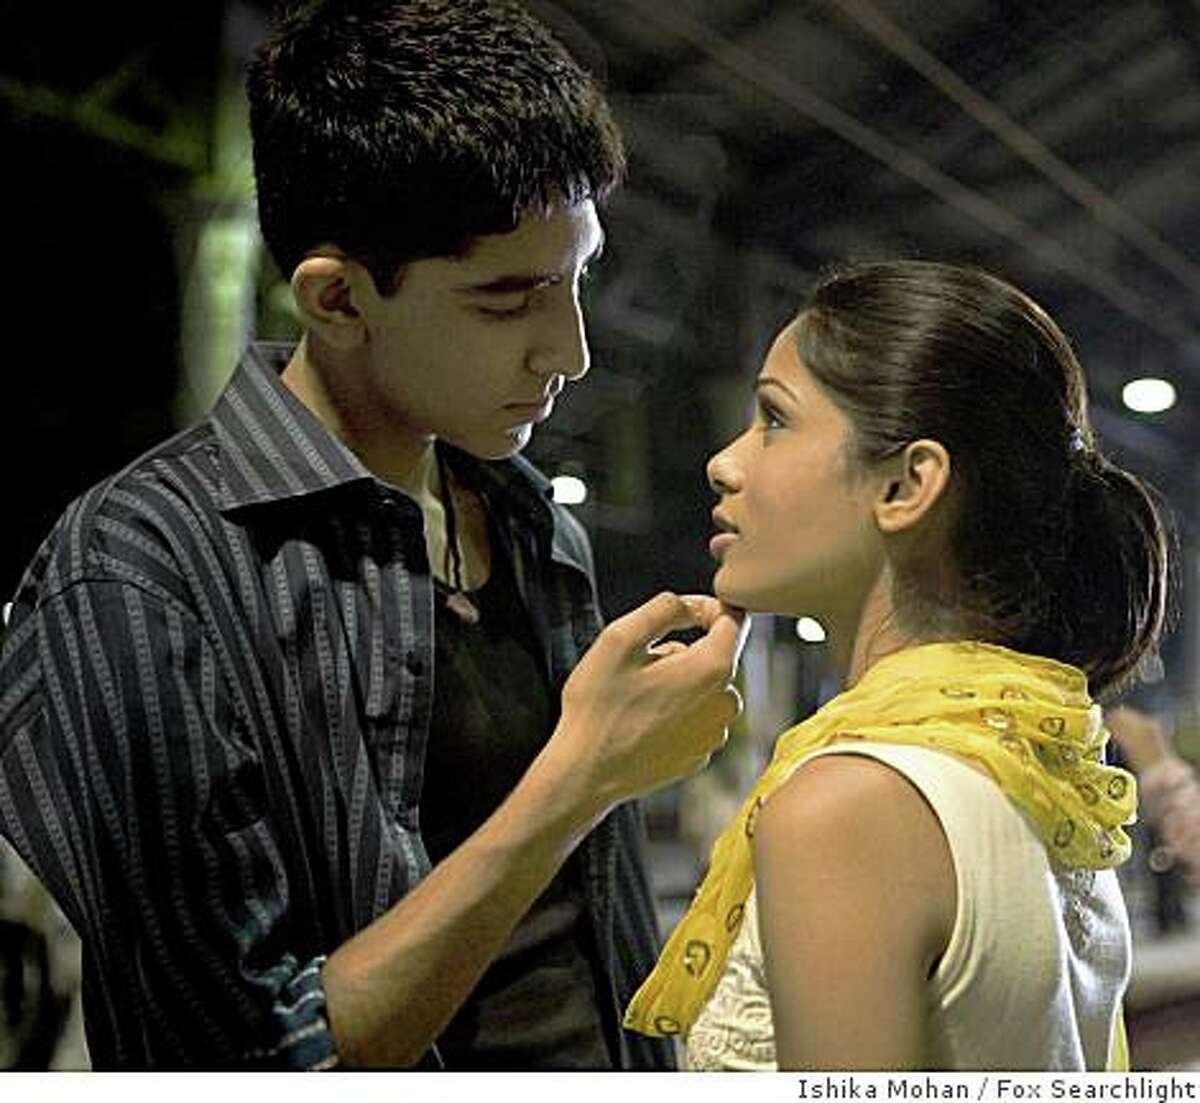 Slumdog Millionaire (2008) Just a decade or so later, the movie has not dated well in memory. It's like a one-off anomaly that captured people's imaginations for a month, then lost them forever.